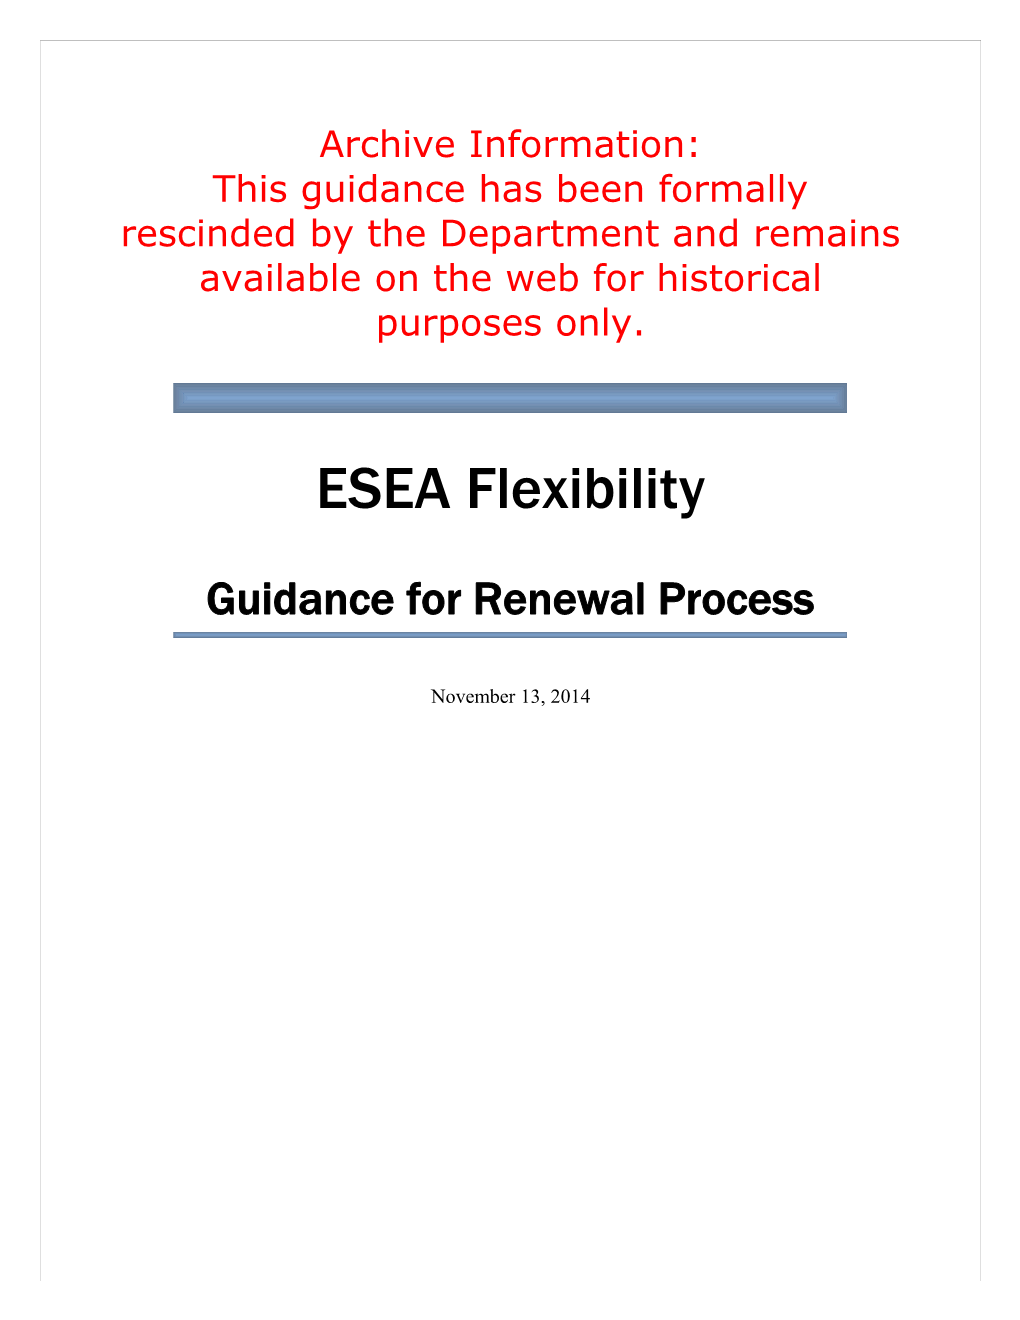 Archive: ESEA Flexibility Guidance for Renewal Process (MS WORD)